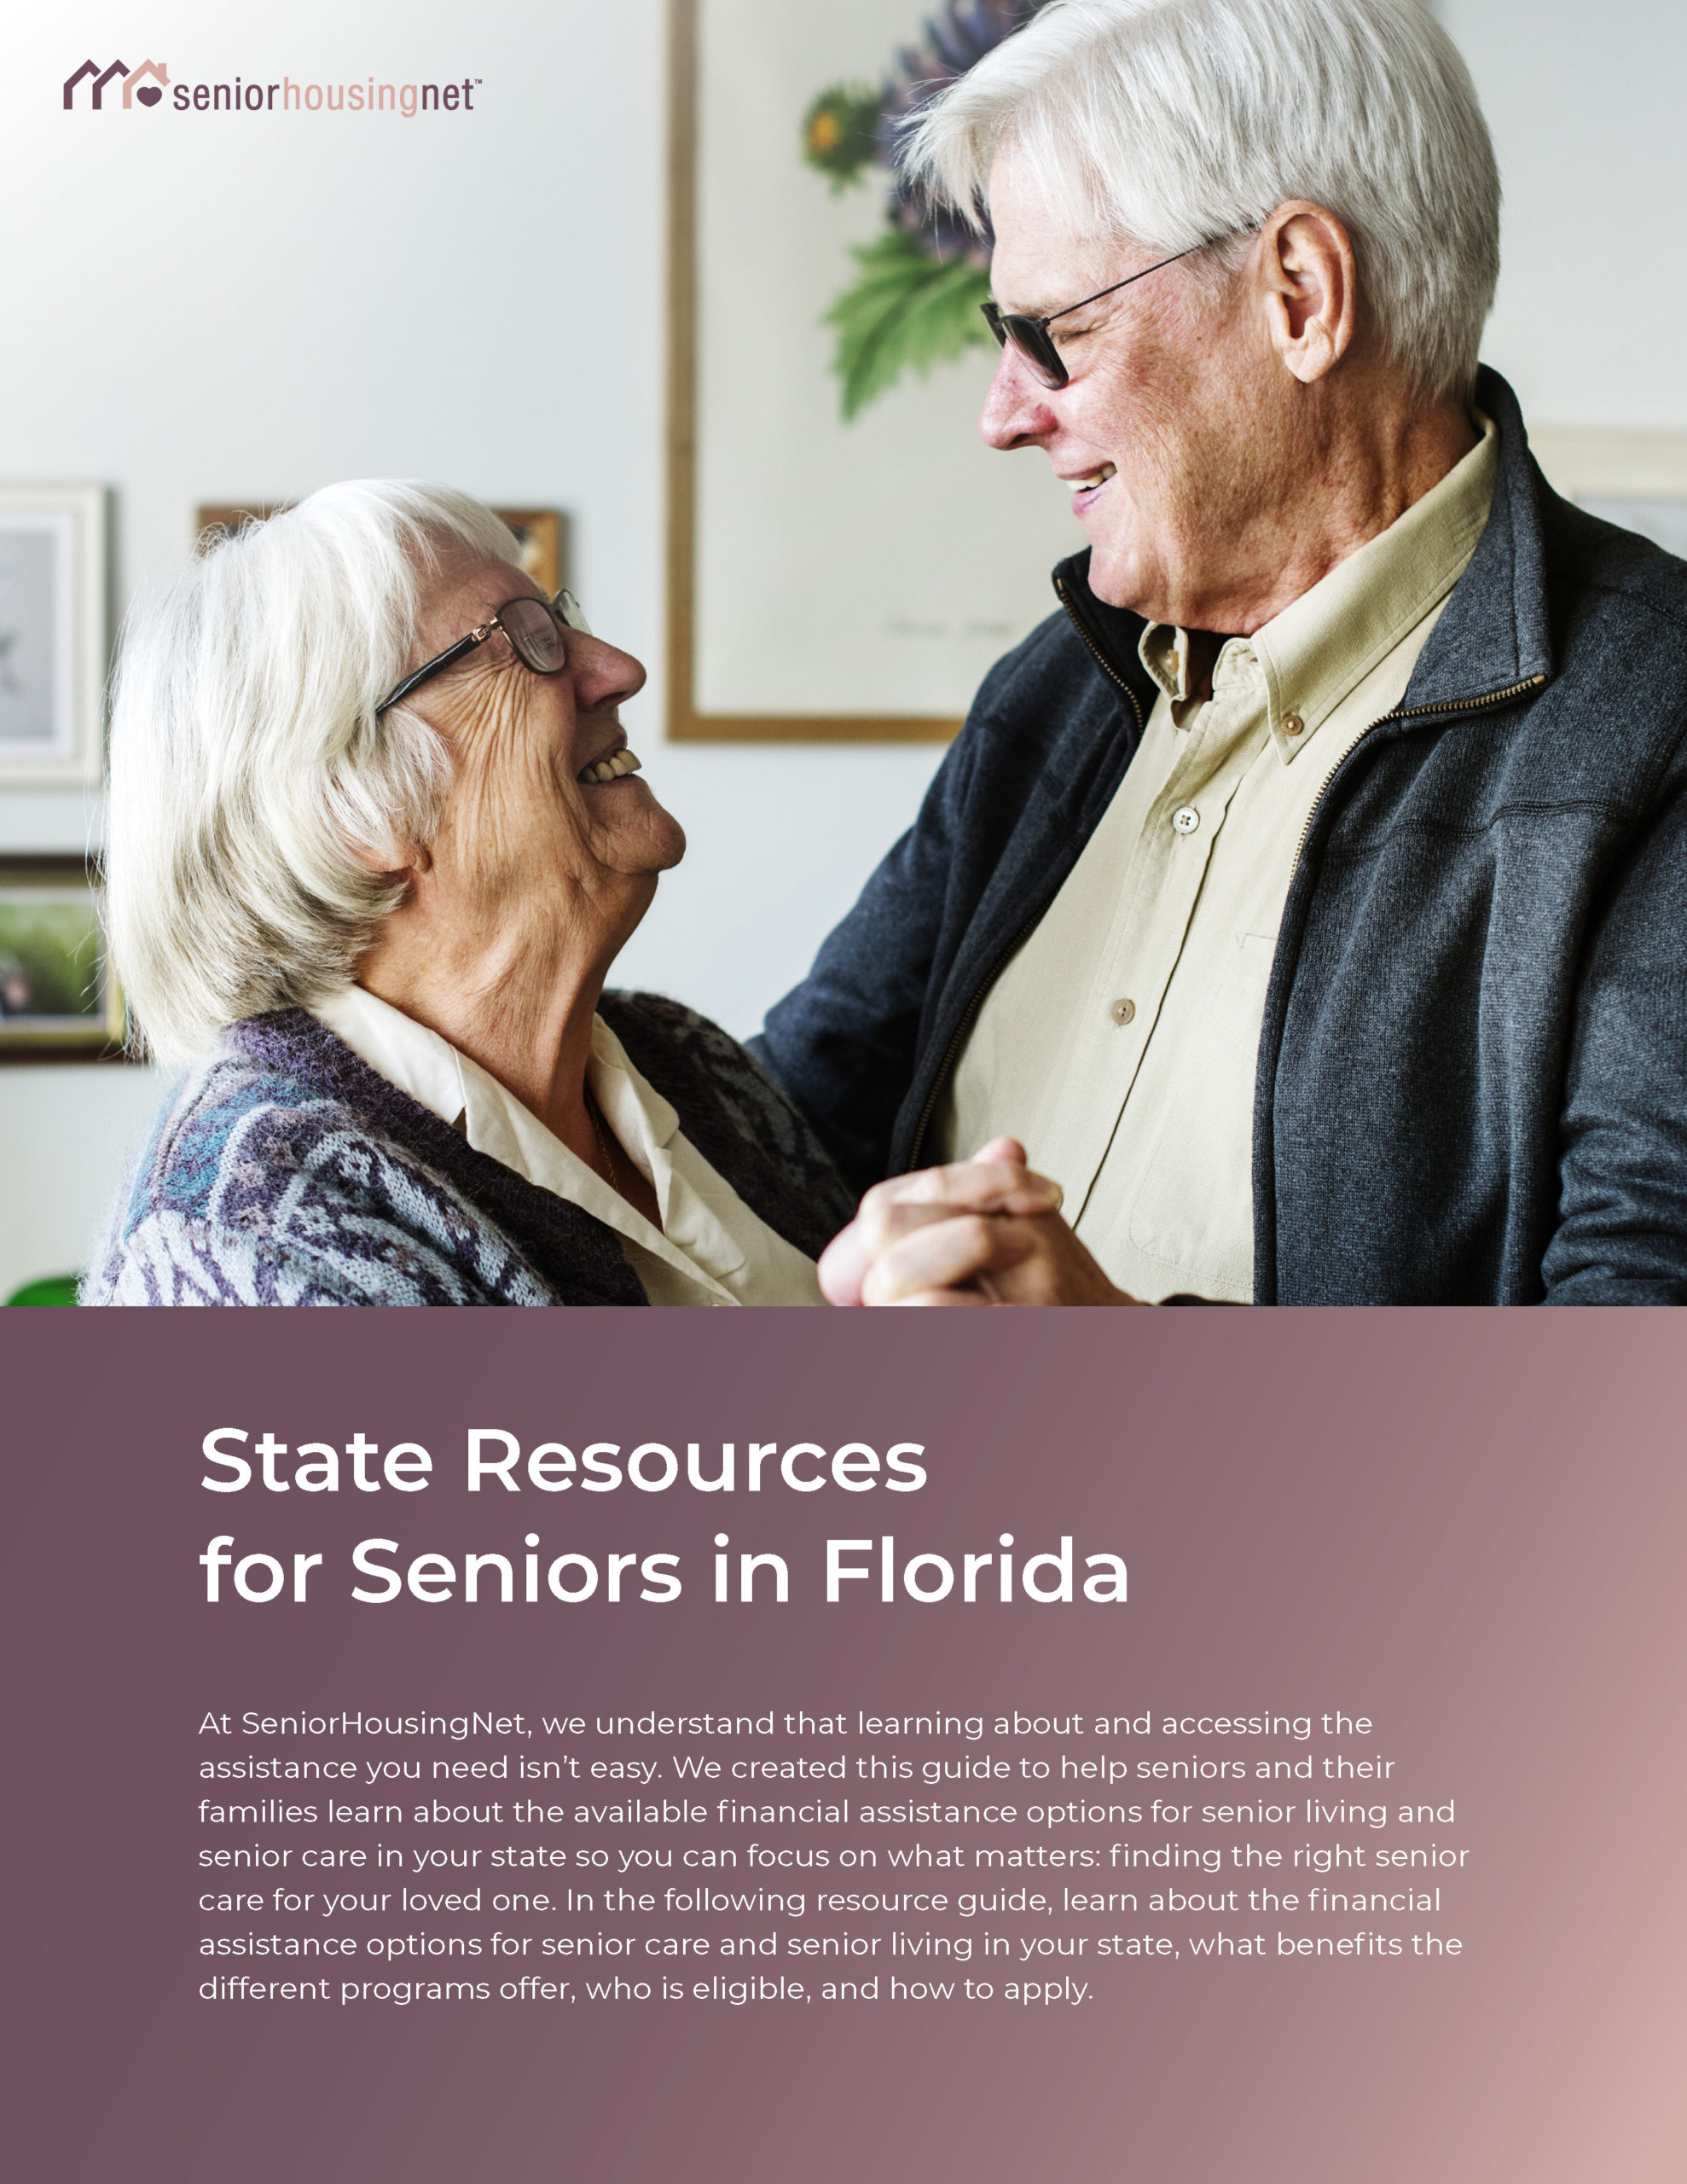 State Resources for Seniors in Florida